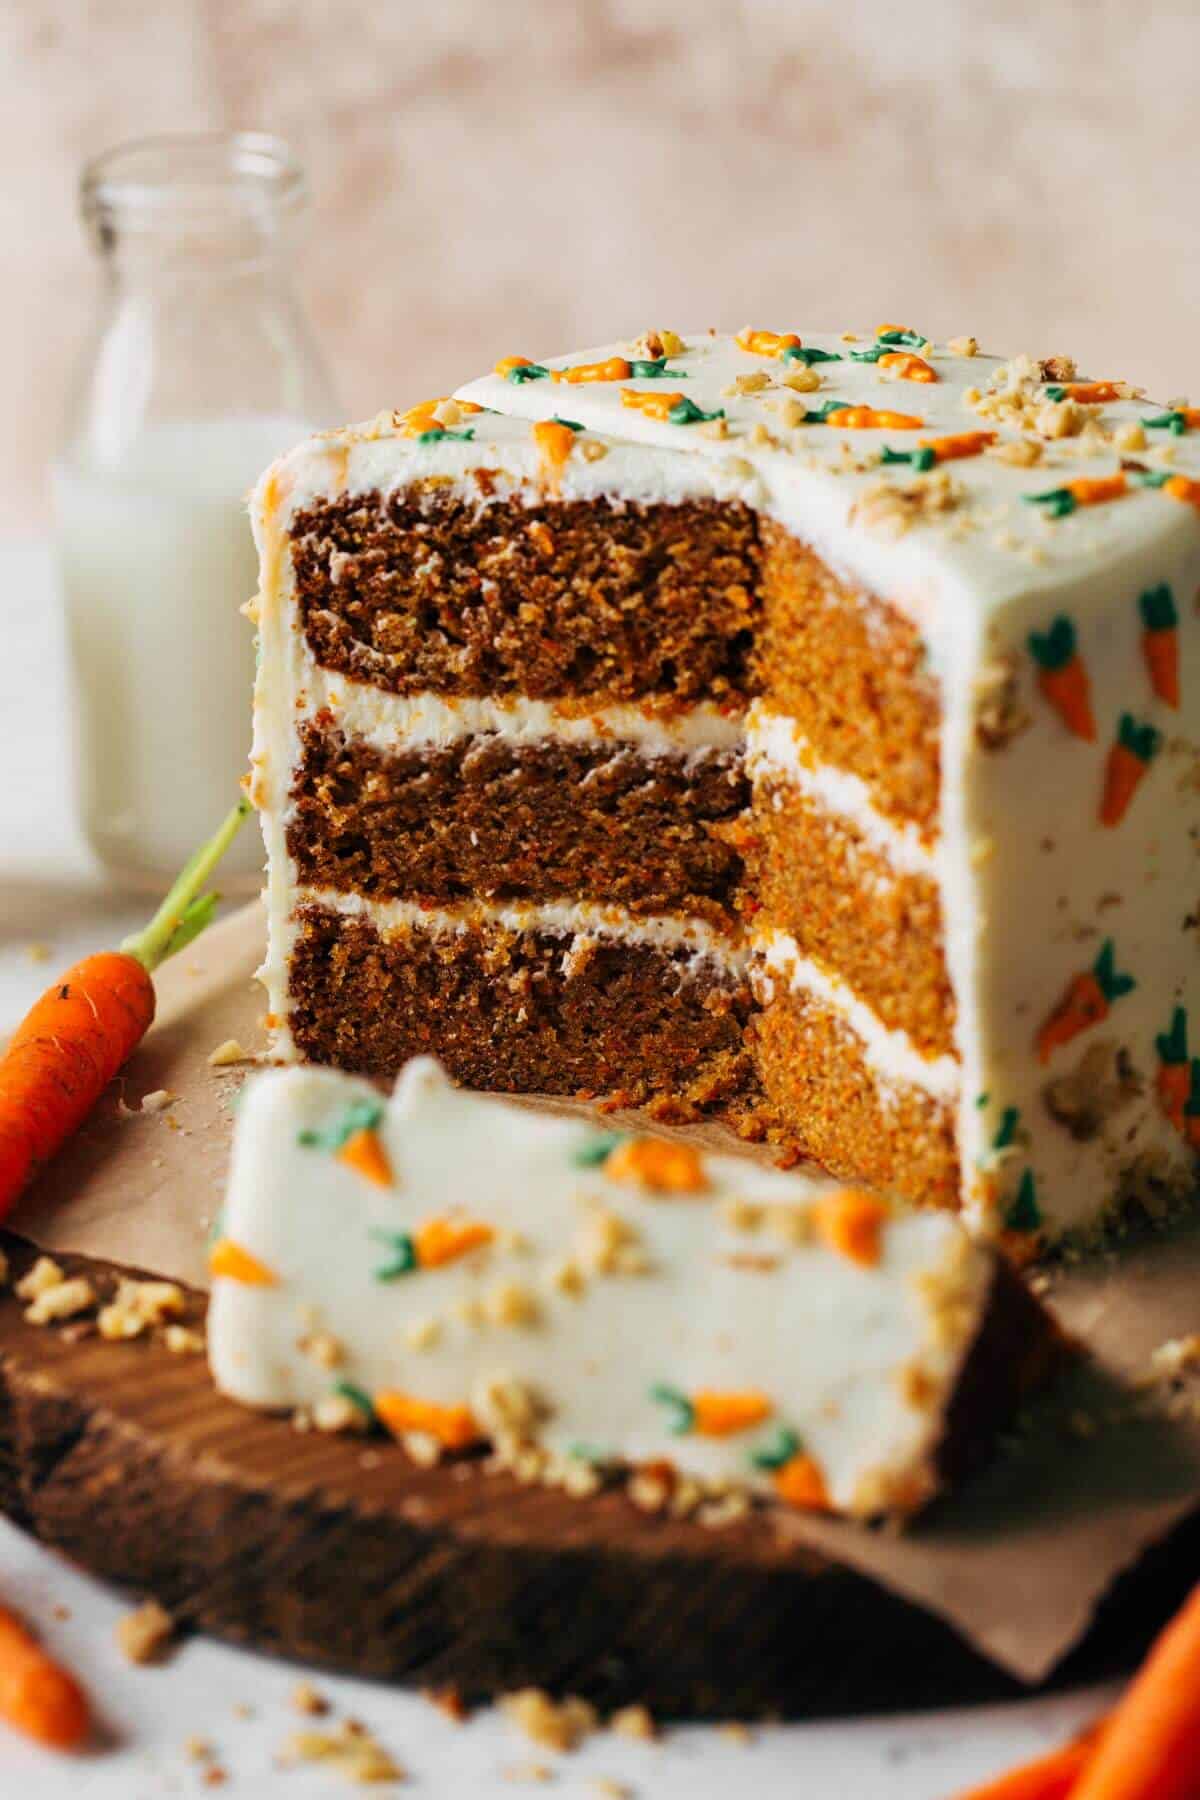 A carrot cake with white frosting and sprinkles.